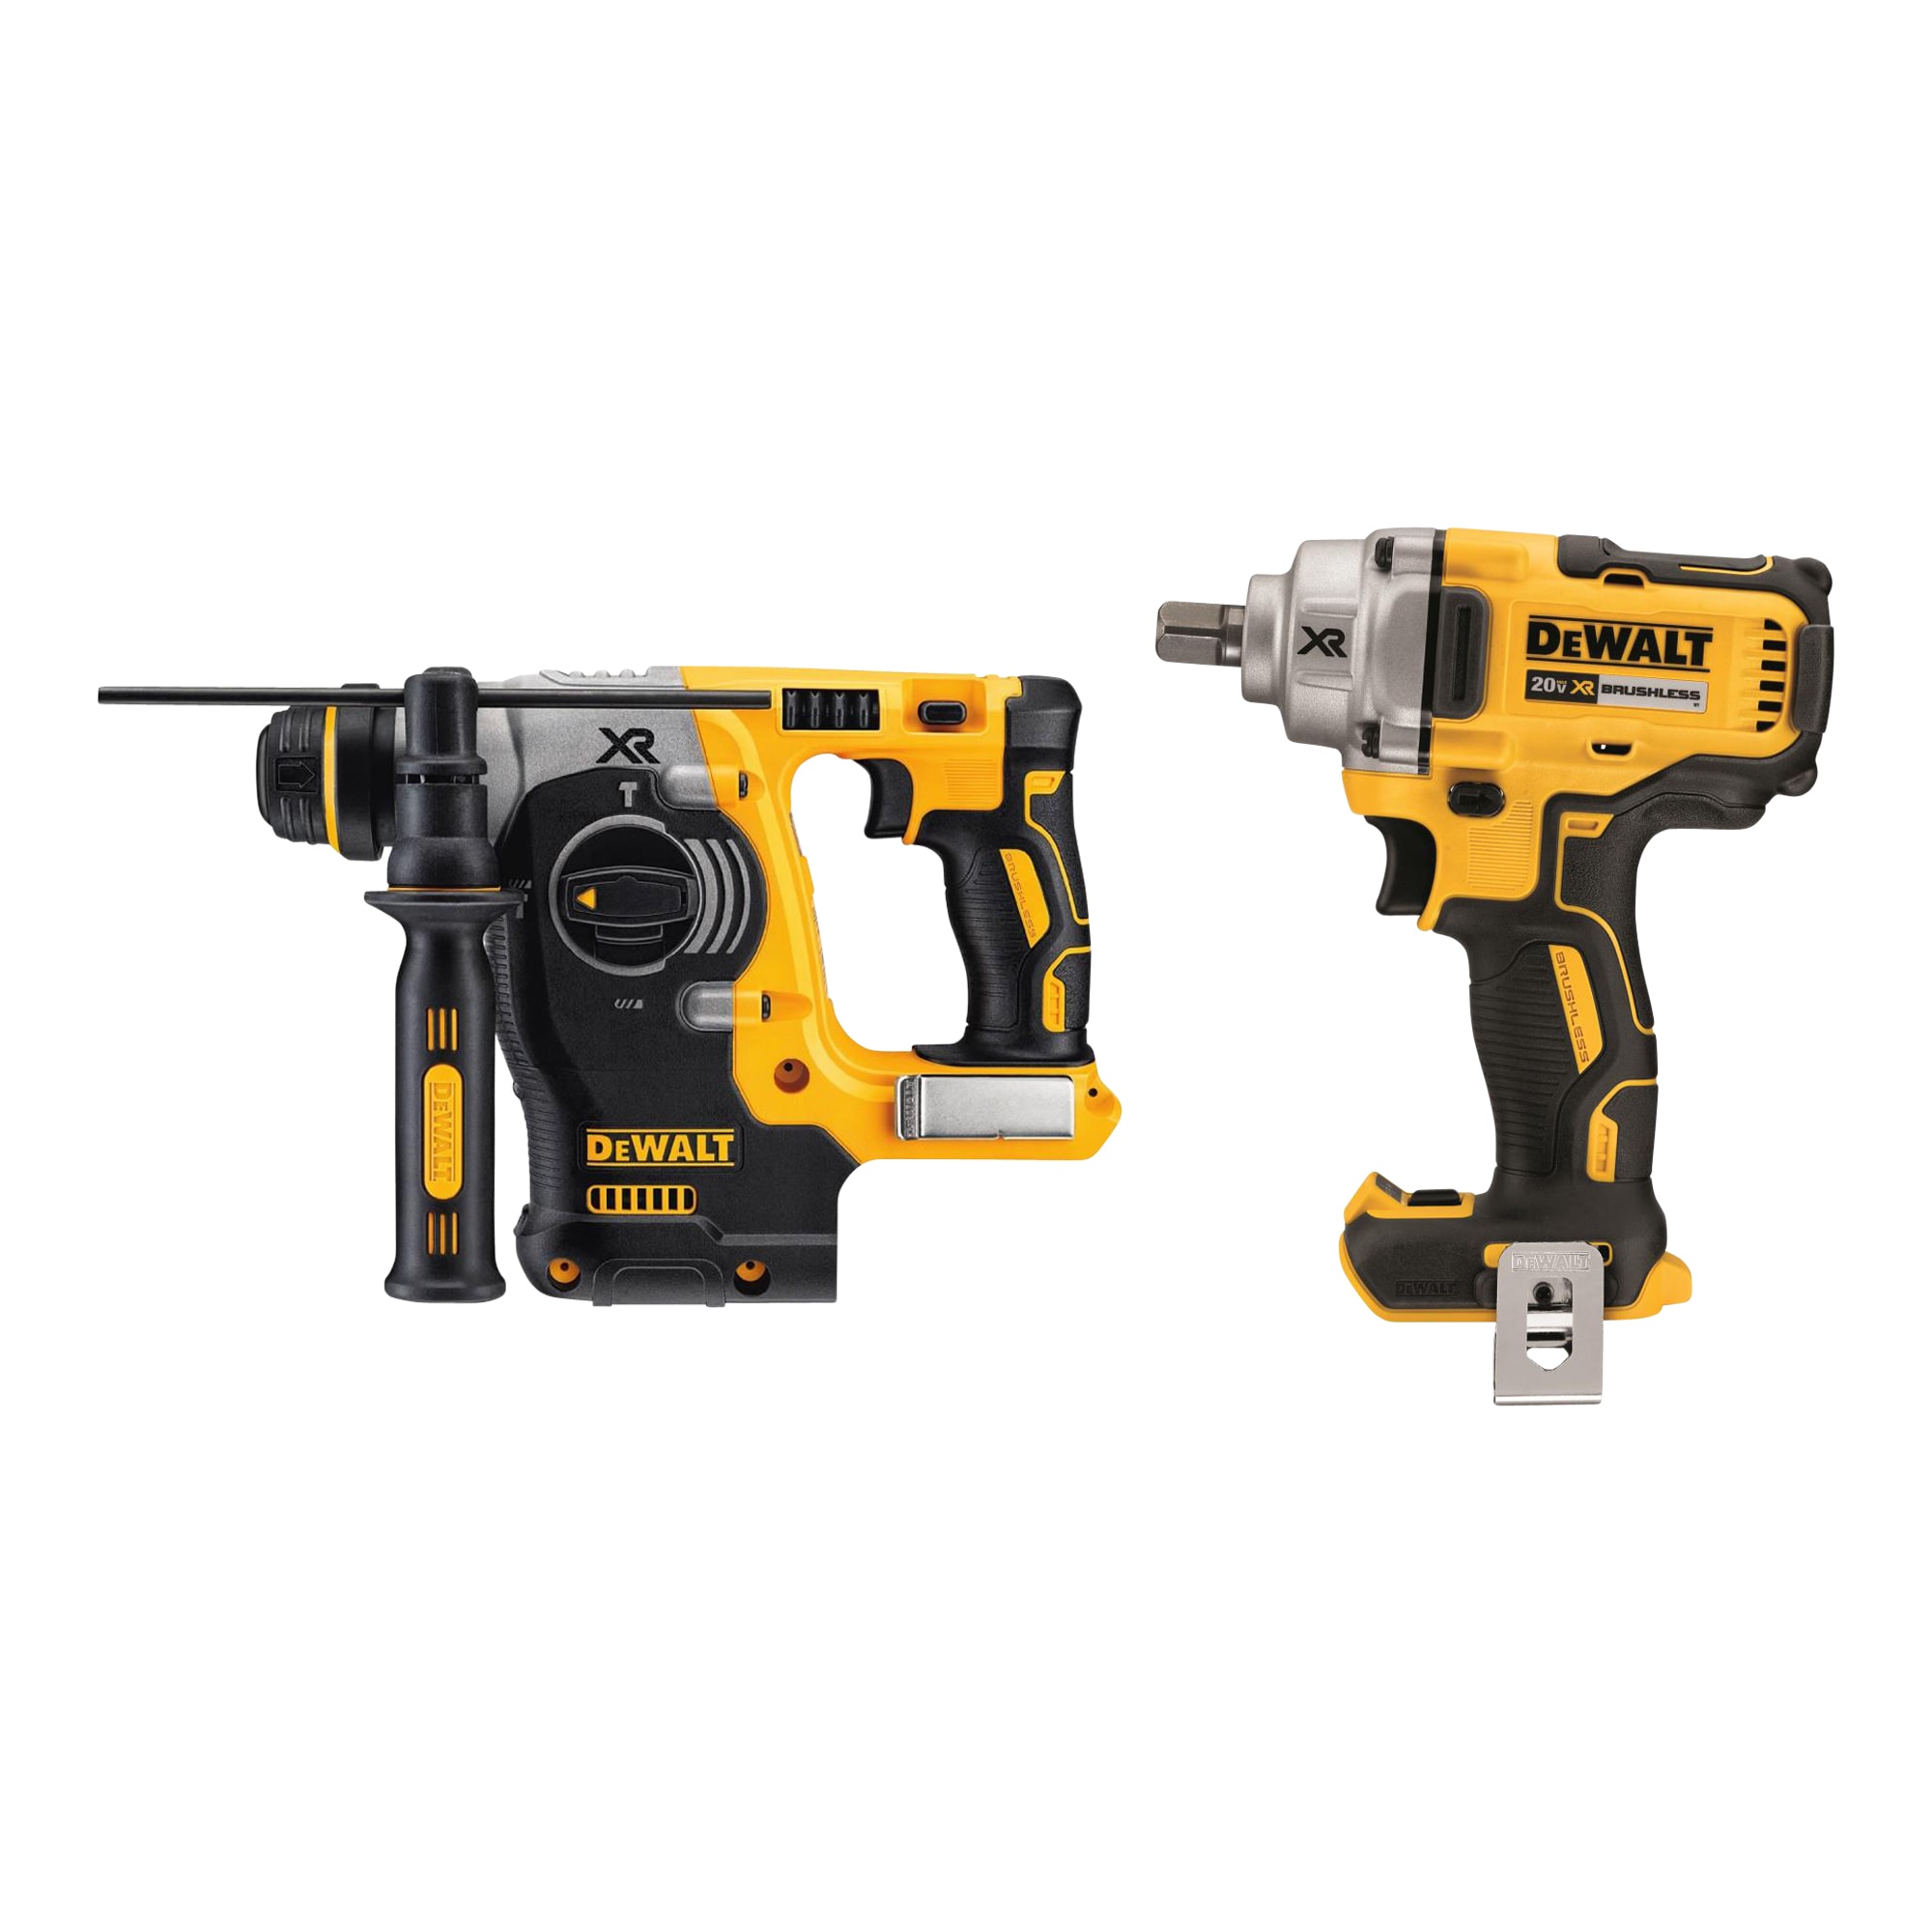 DEWALT XR Max 1-in SDS-Plus Variable Speed Cordless Rotary Hammer Drill XR 20-volt Max Variable Brushless 1/2-in Drive Cordless Impact Wrench at Lowes.com